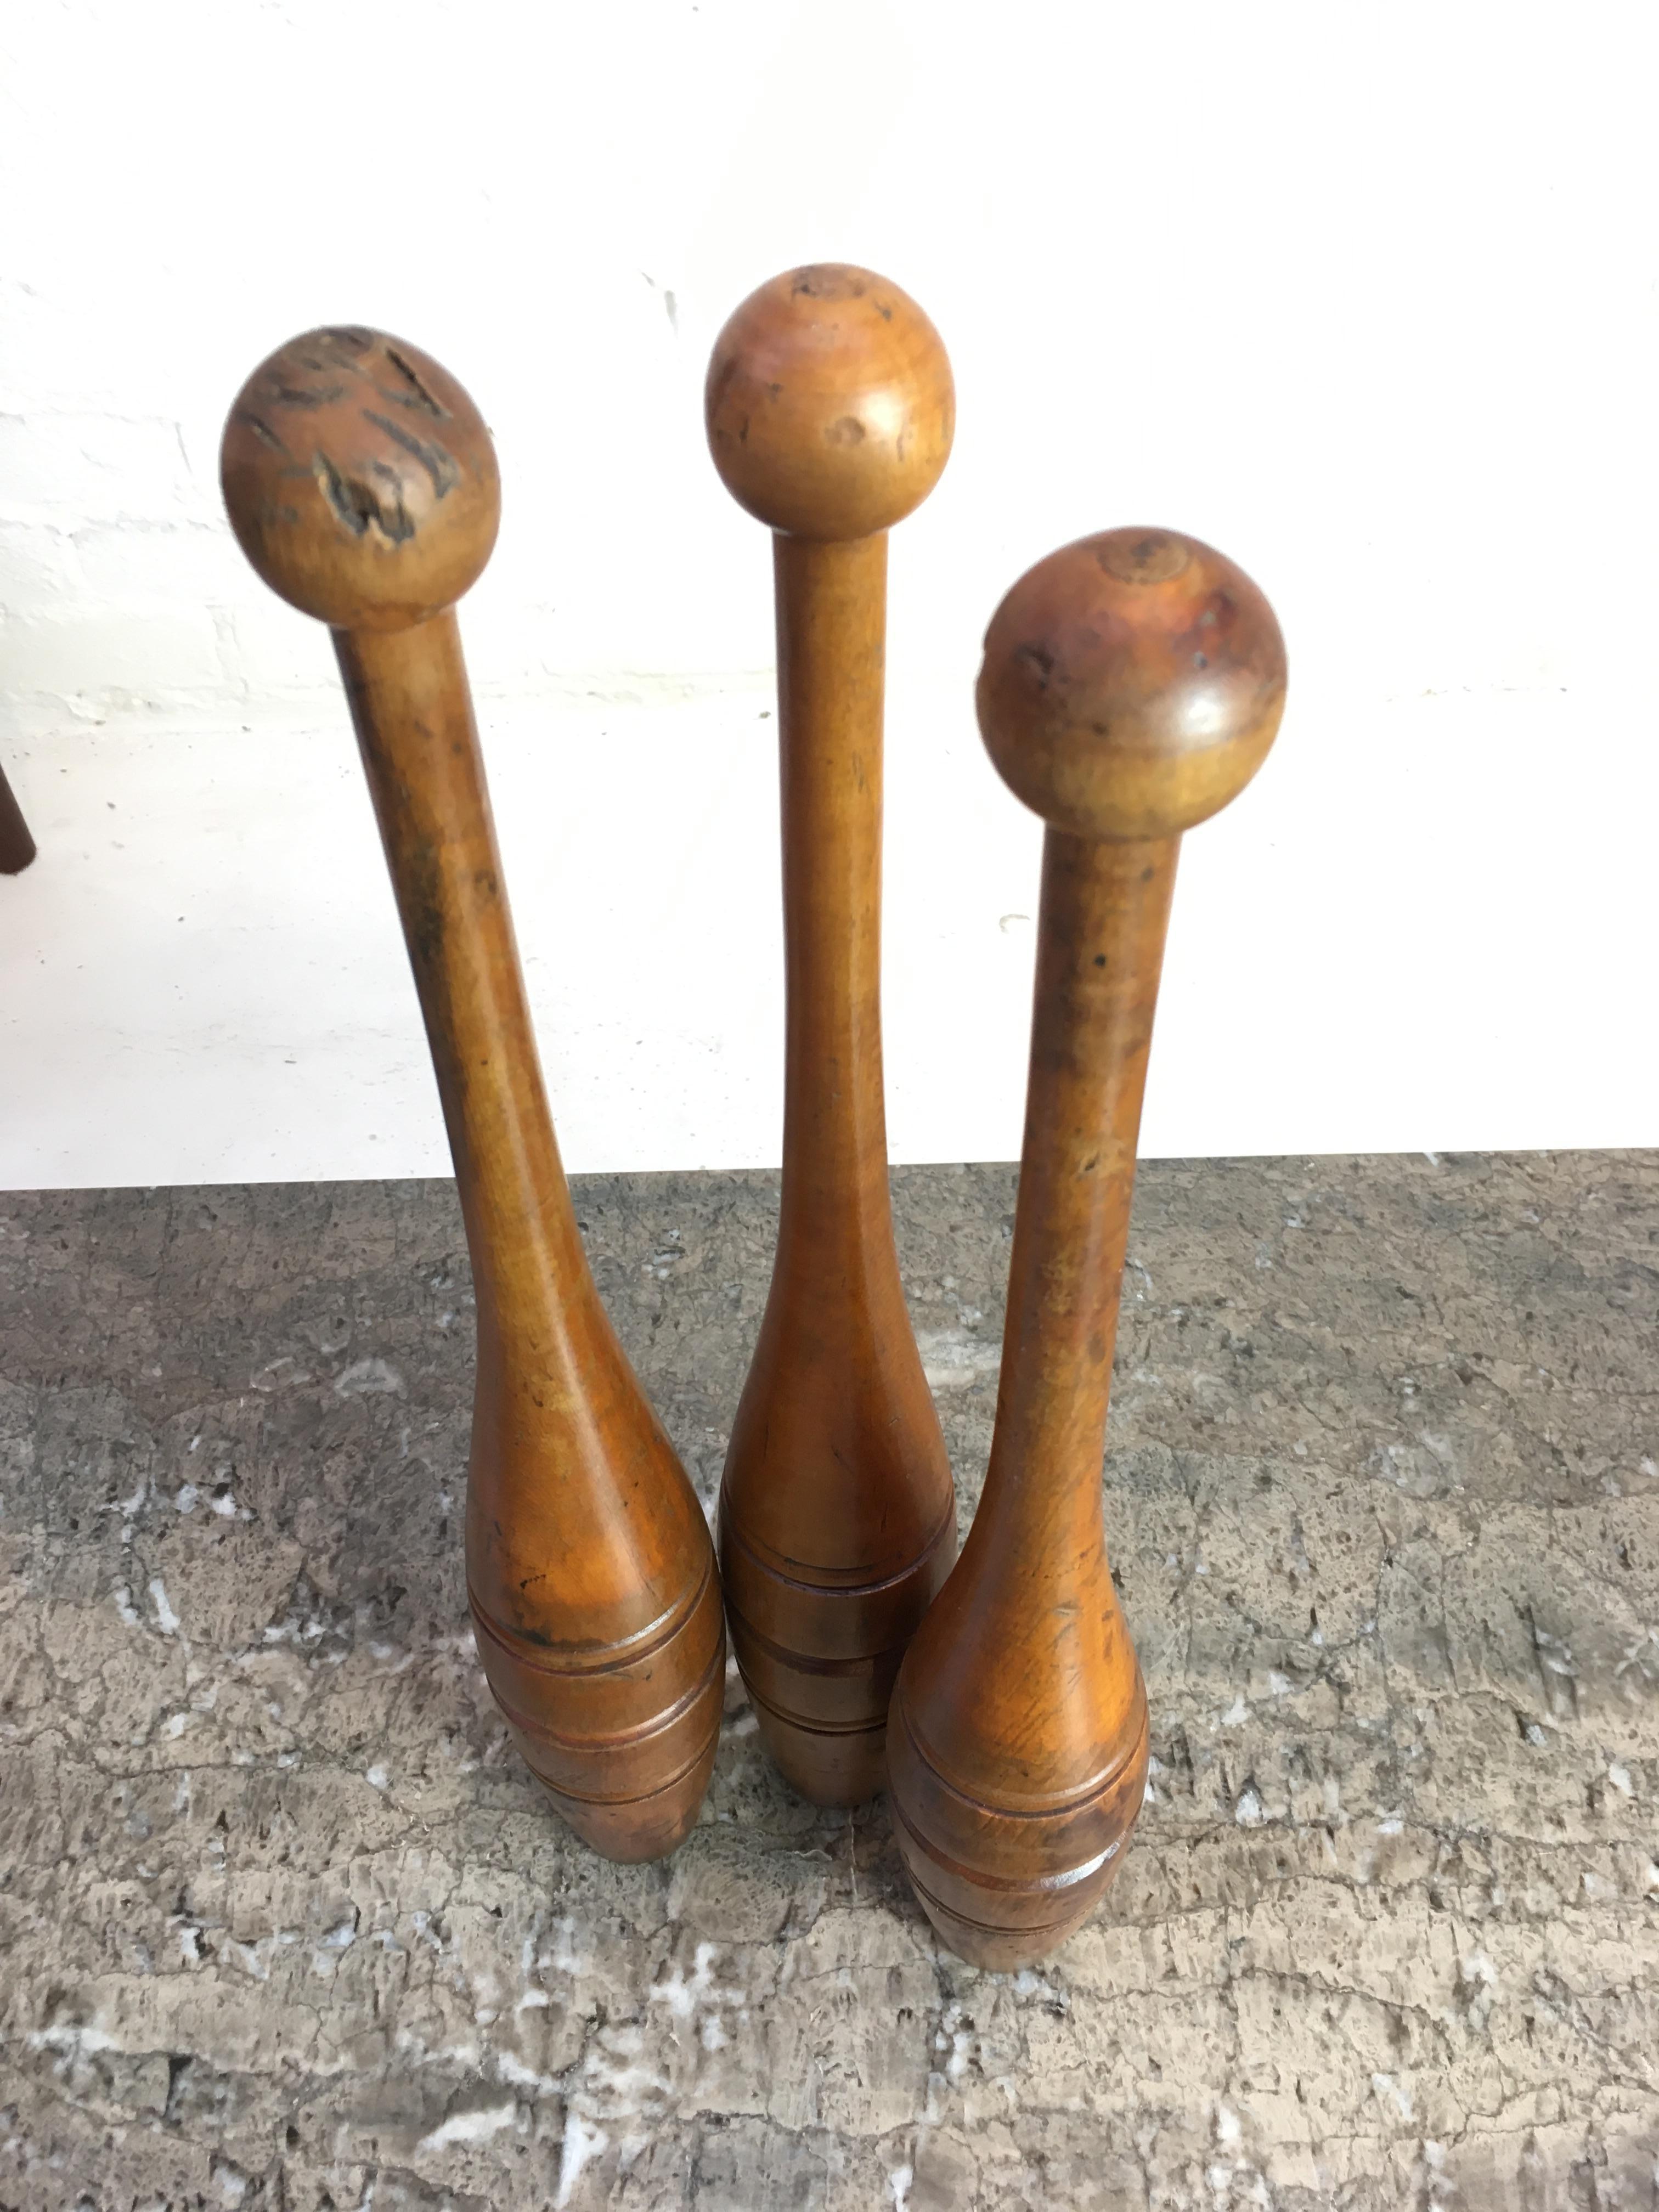 English Set of Three Early 20th Century Turned Maple Juggling Pins Clubs